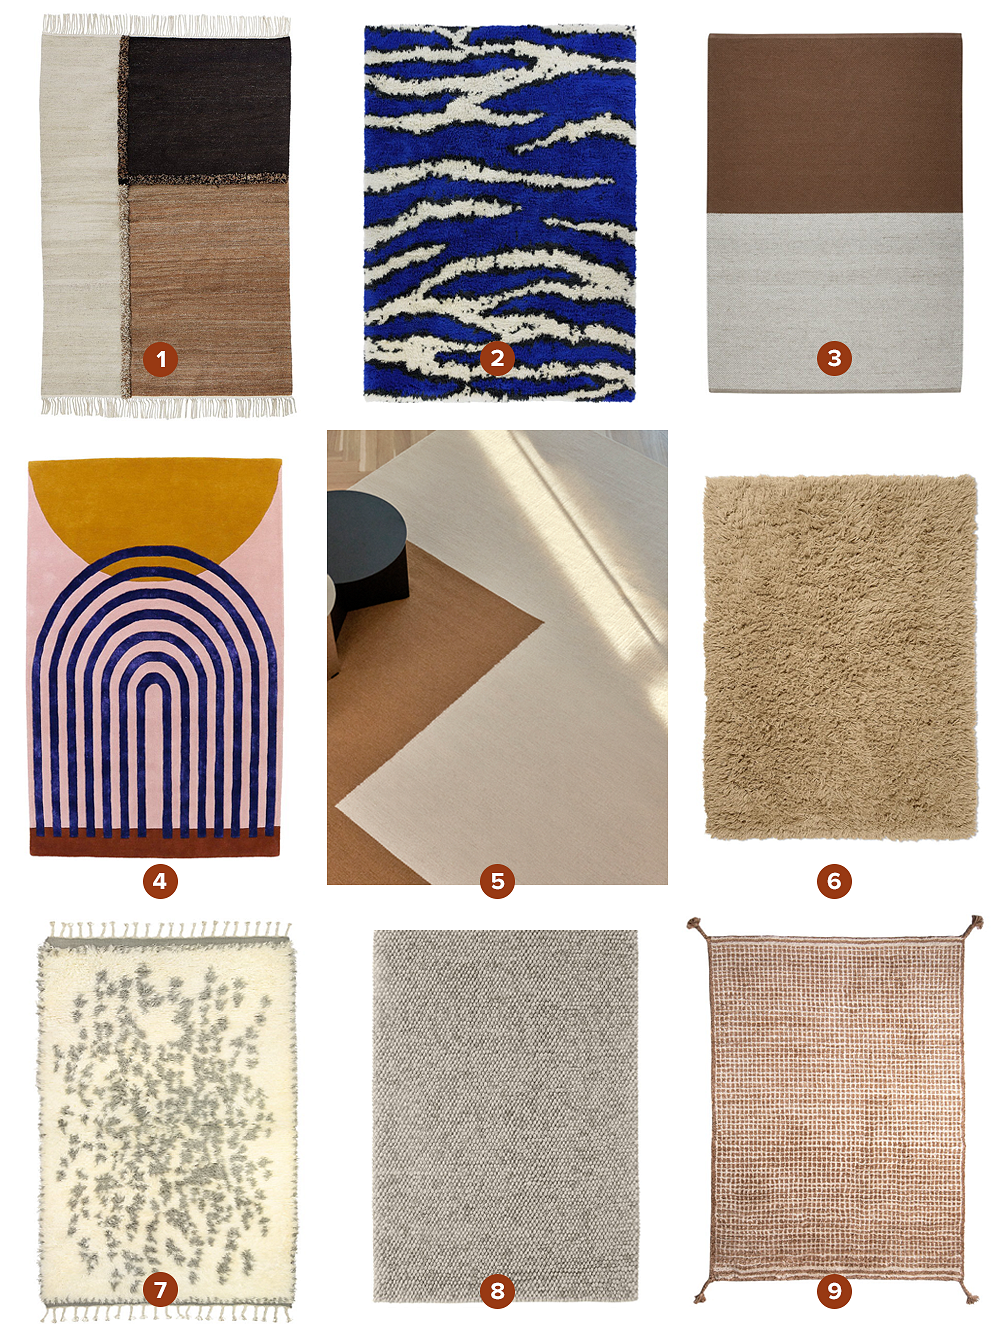 A collage image of thick rugs from Finnish Design Shop's range: wool rugs, shaggy rugs, patterned rugs, fringed rugs etc.